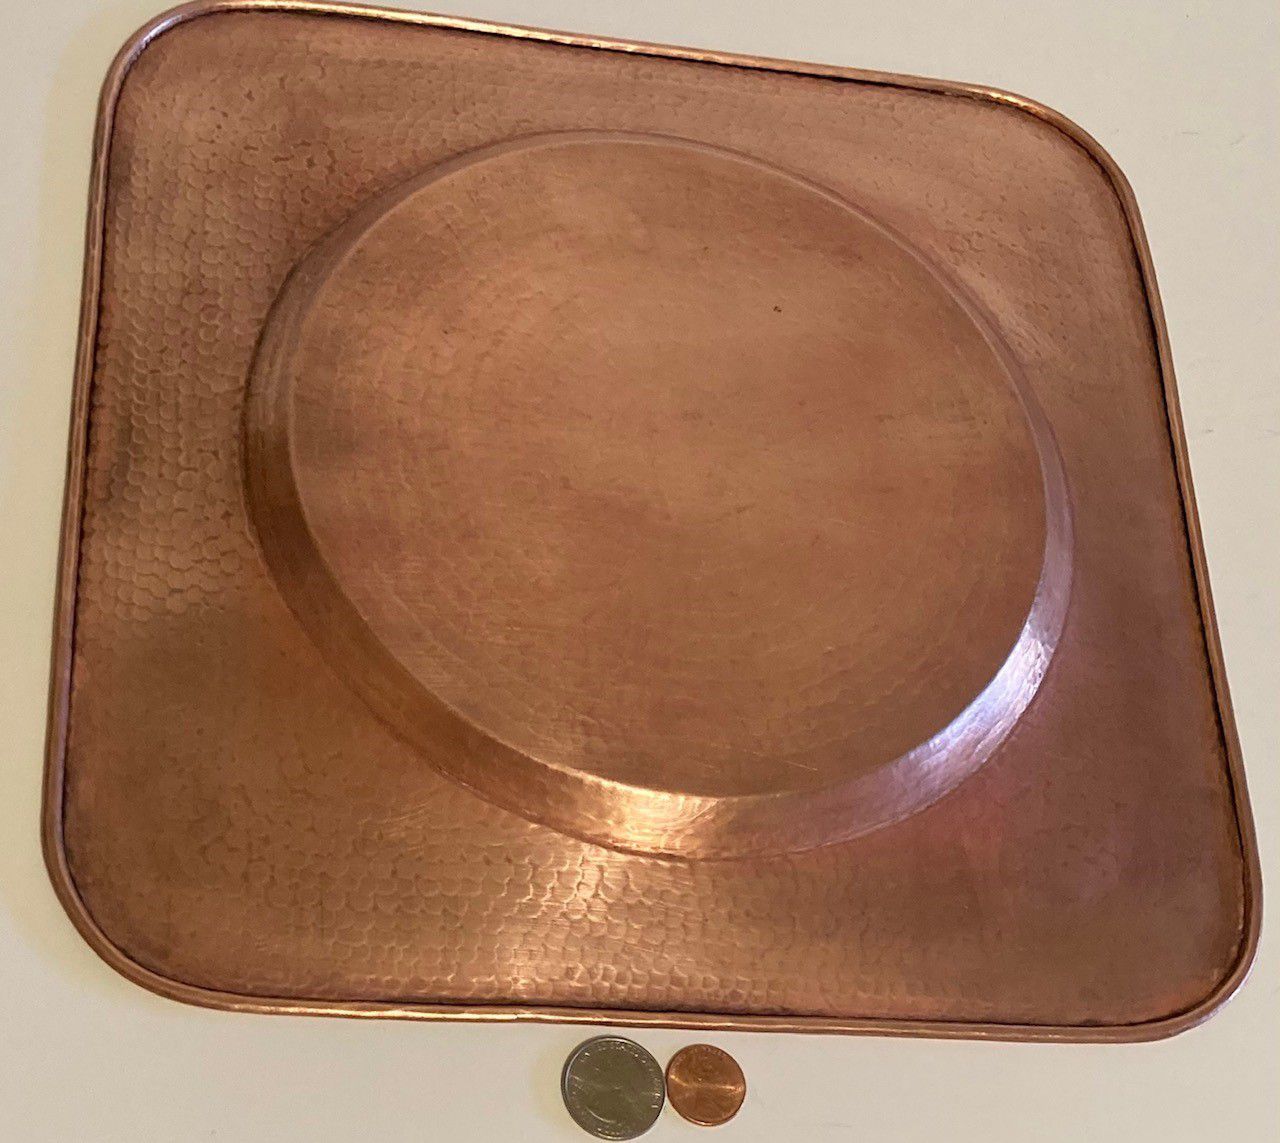 Vintage Metal Copper Hammered Metal Tray, Platter, Dish, Fruit Holder, Heavy Duty, Quality, 12" x 12", Home Decor, Kitchen Decor, Table Display, Shelf